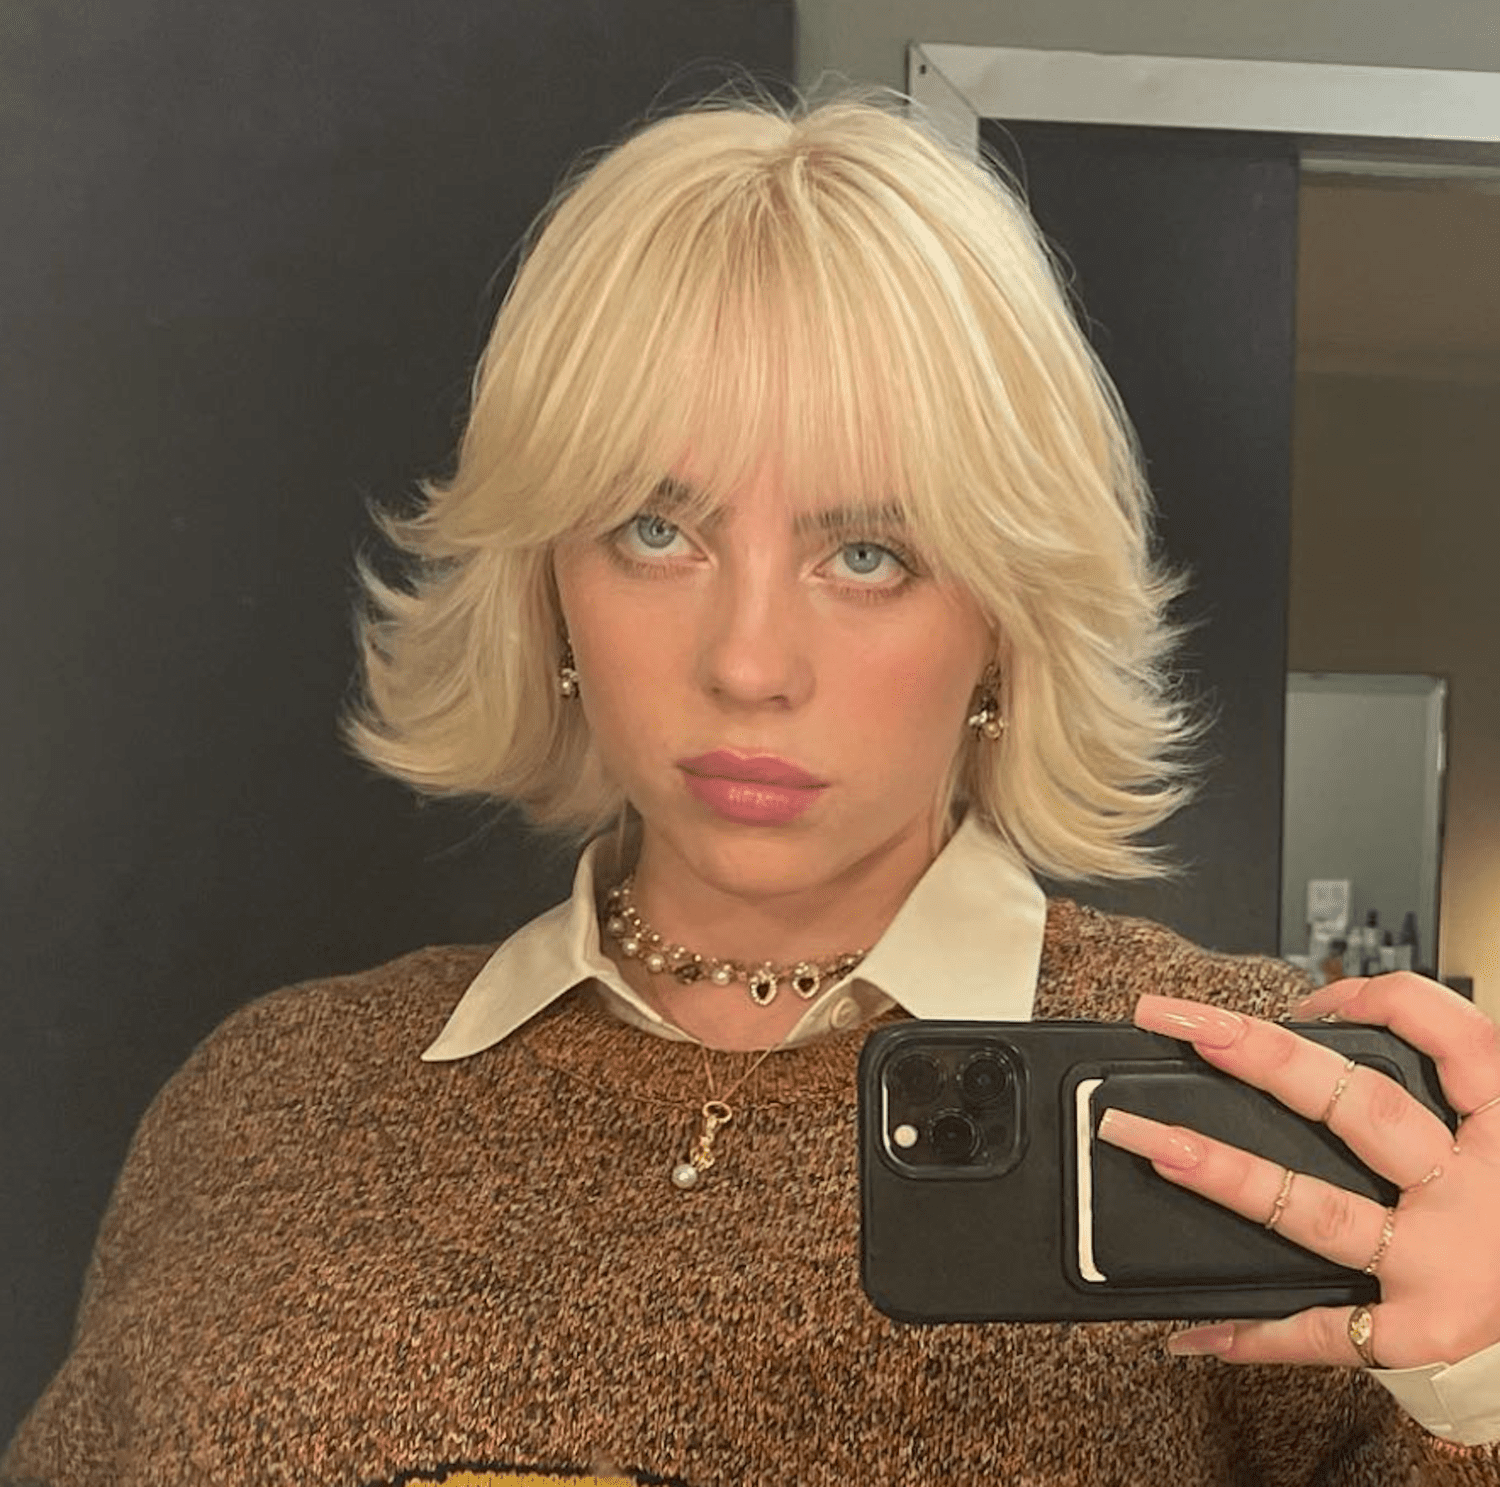 Billie Eilish with flipped-out shaggy bob hairstyle with bangs in mirror selfie